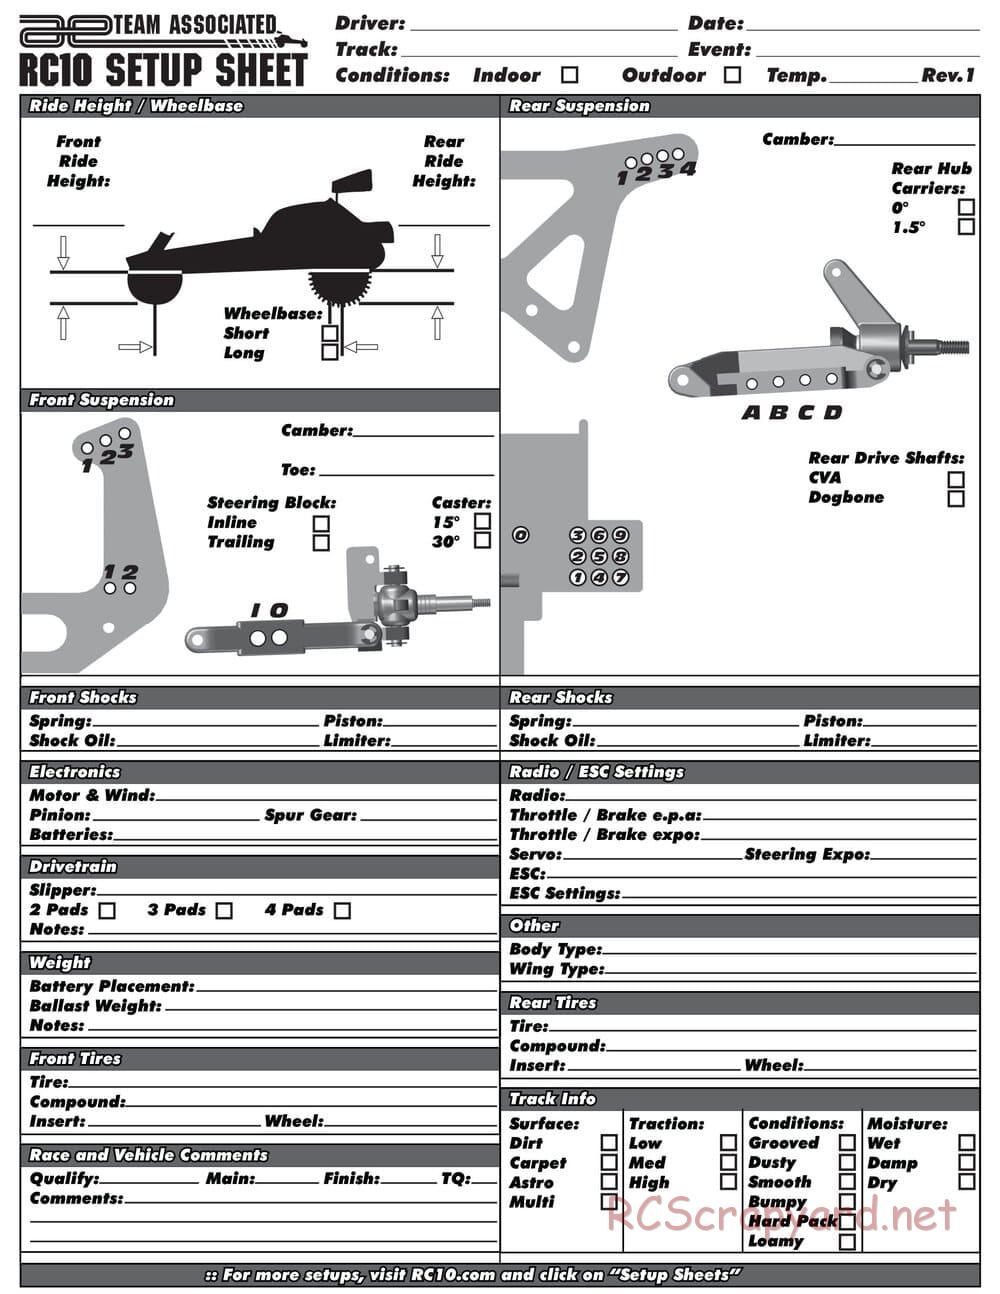 Team Associated - RC10 World's Car - Manual - Page 29